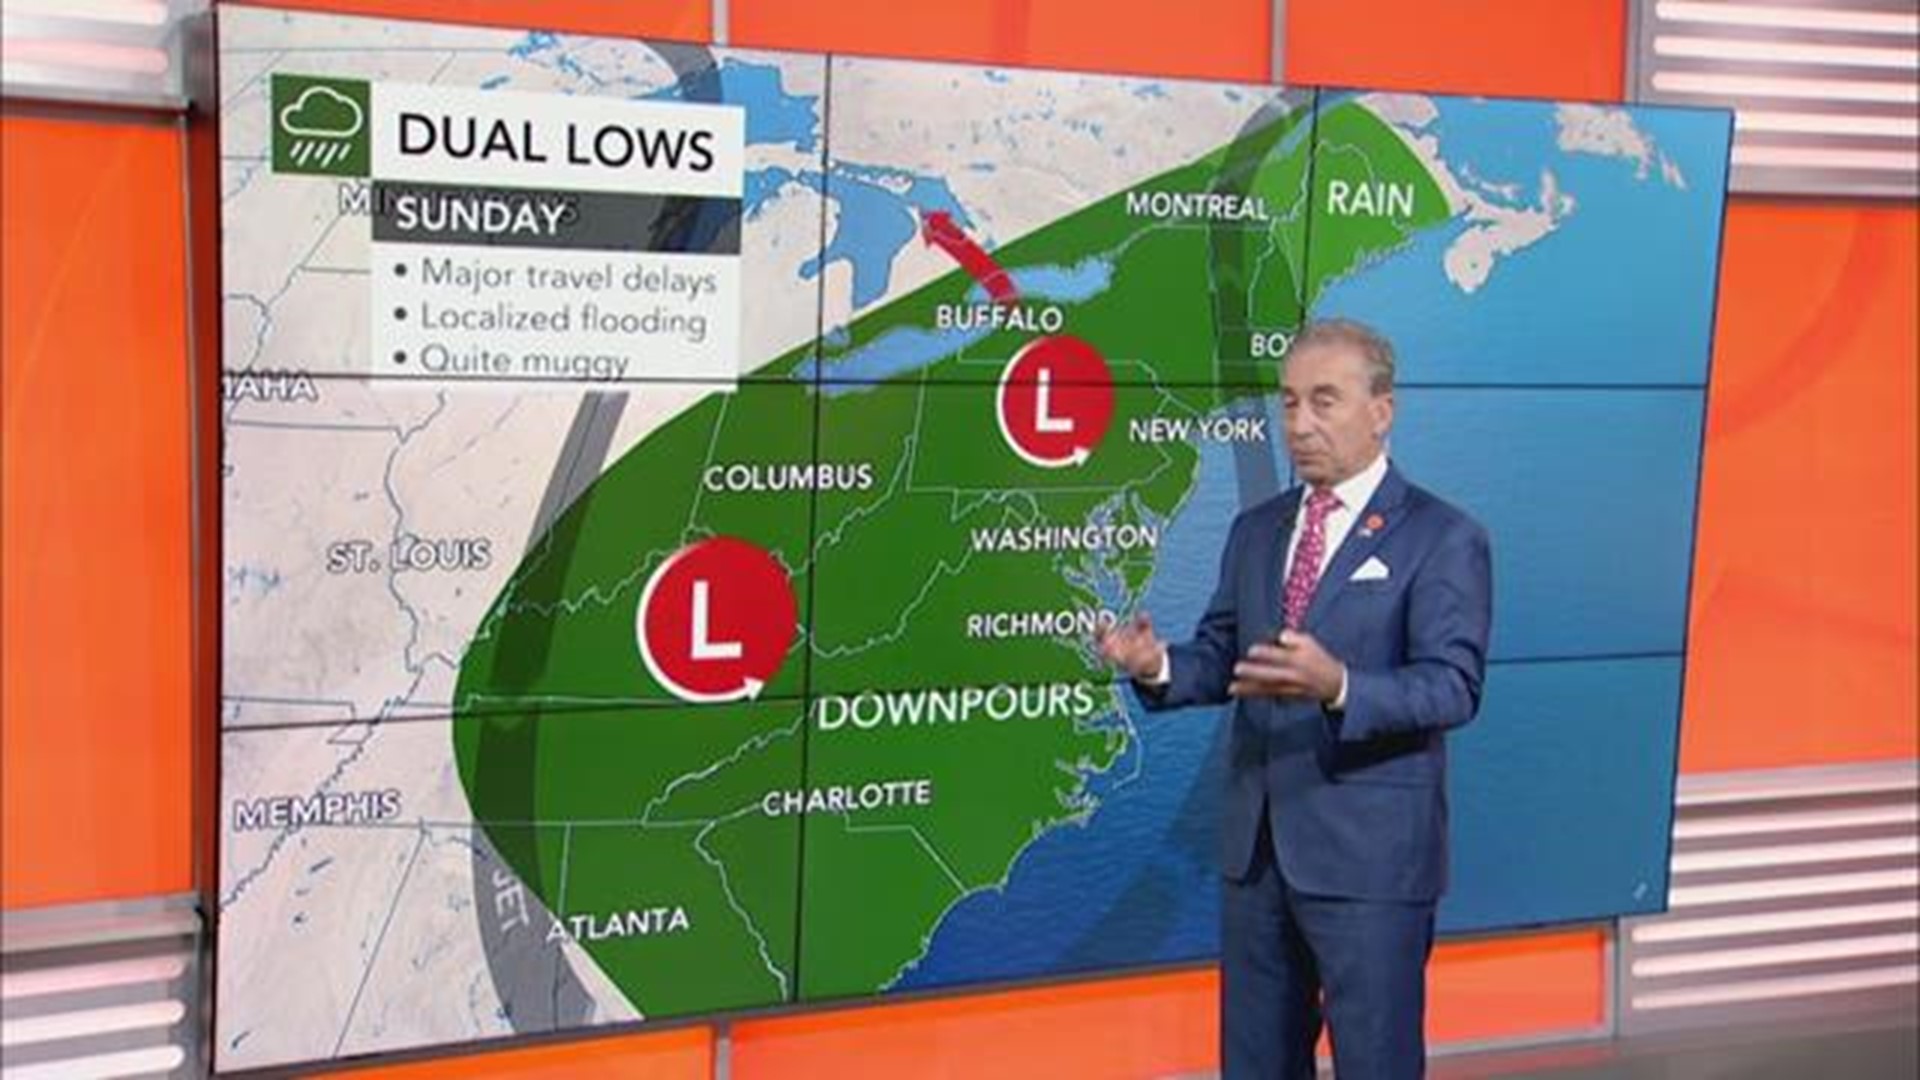 The weather pattern will become more conducive for showers and thunderstorms, which could result in flooding, to develop this week in the Northeast.